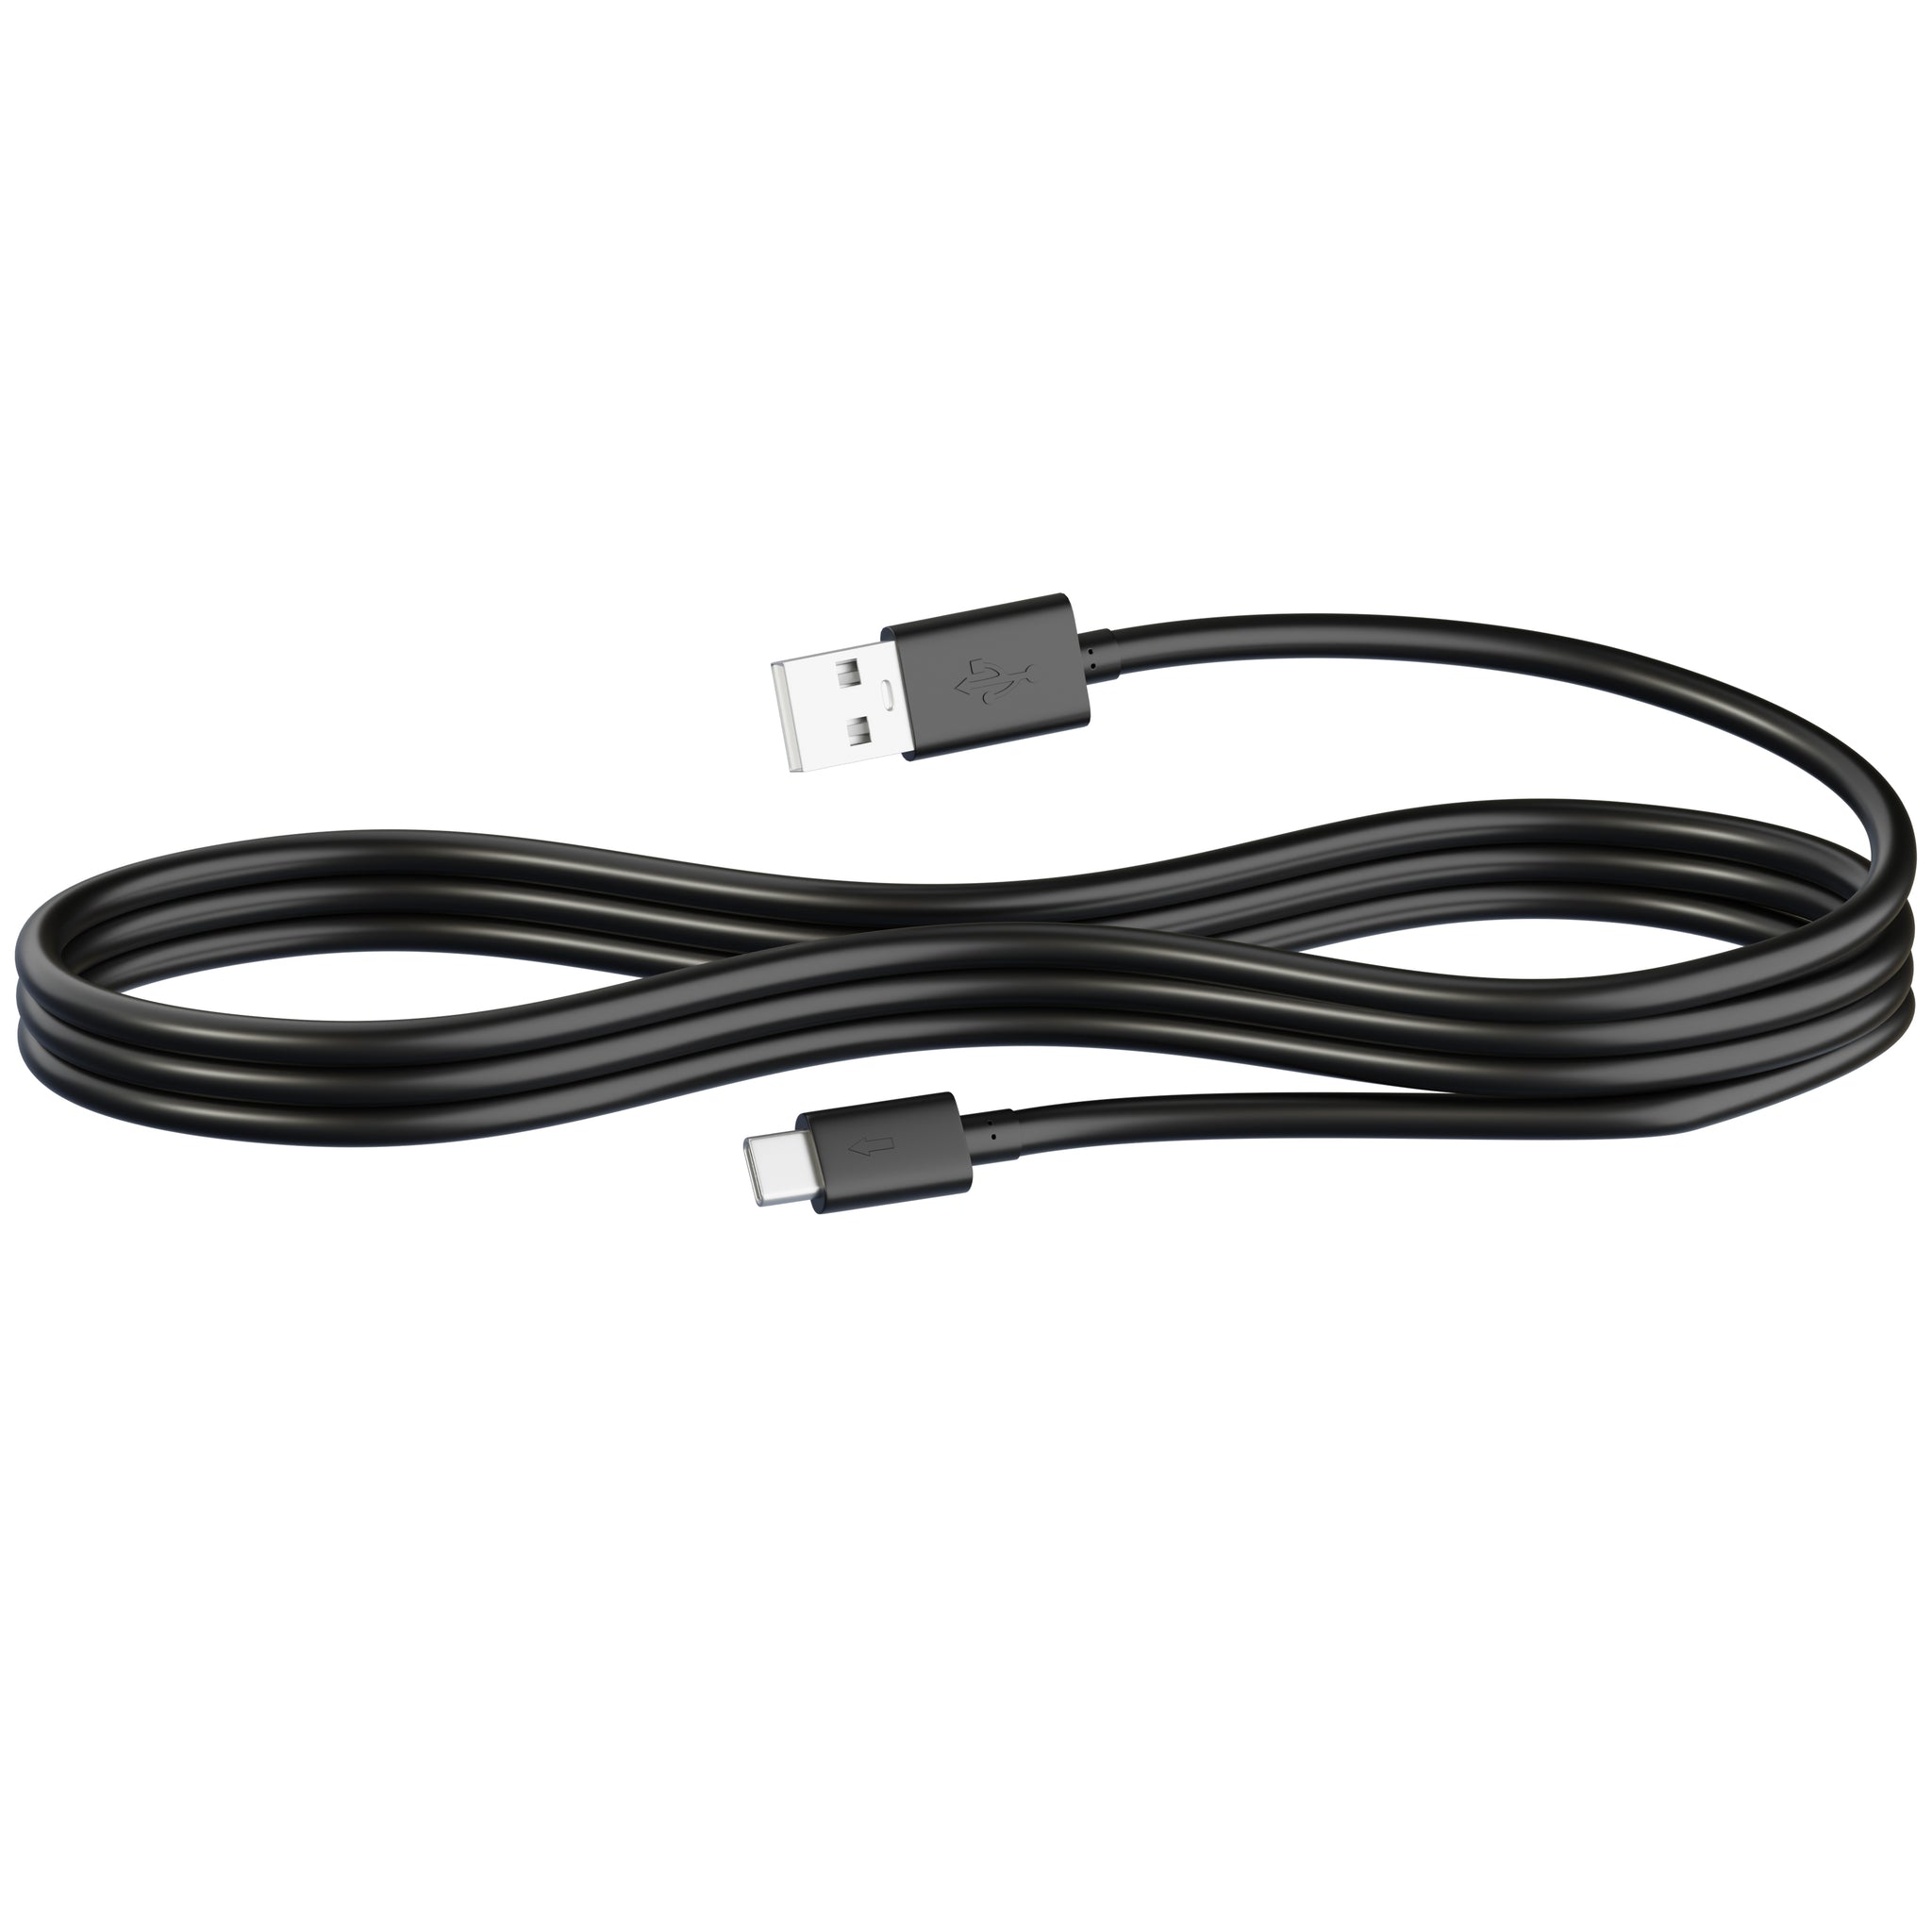 ROVE Ultimate 1M/3FT USB-C Data Cable for Connecting ROVE R3, R2-4K PRO and R2-4K (with USB-C Port) Dash Cam Models to Your PC/MAC | Check Compatibility Image Before Purchasing